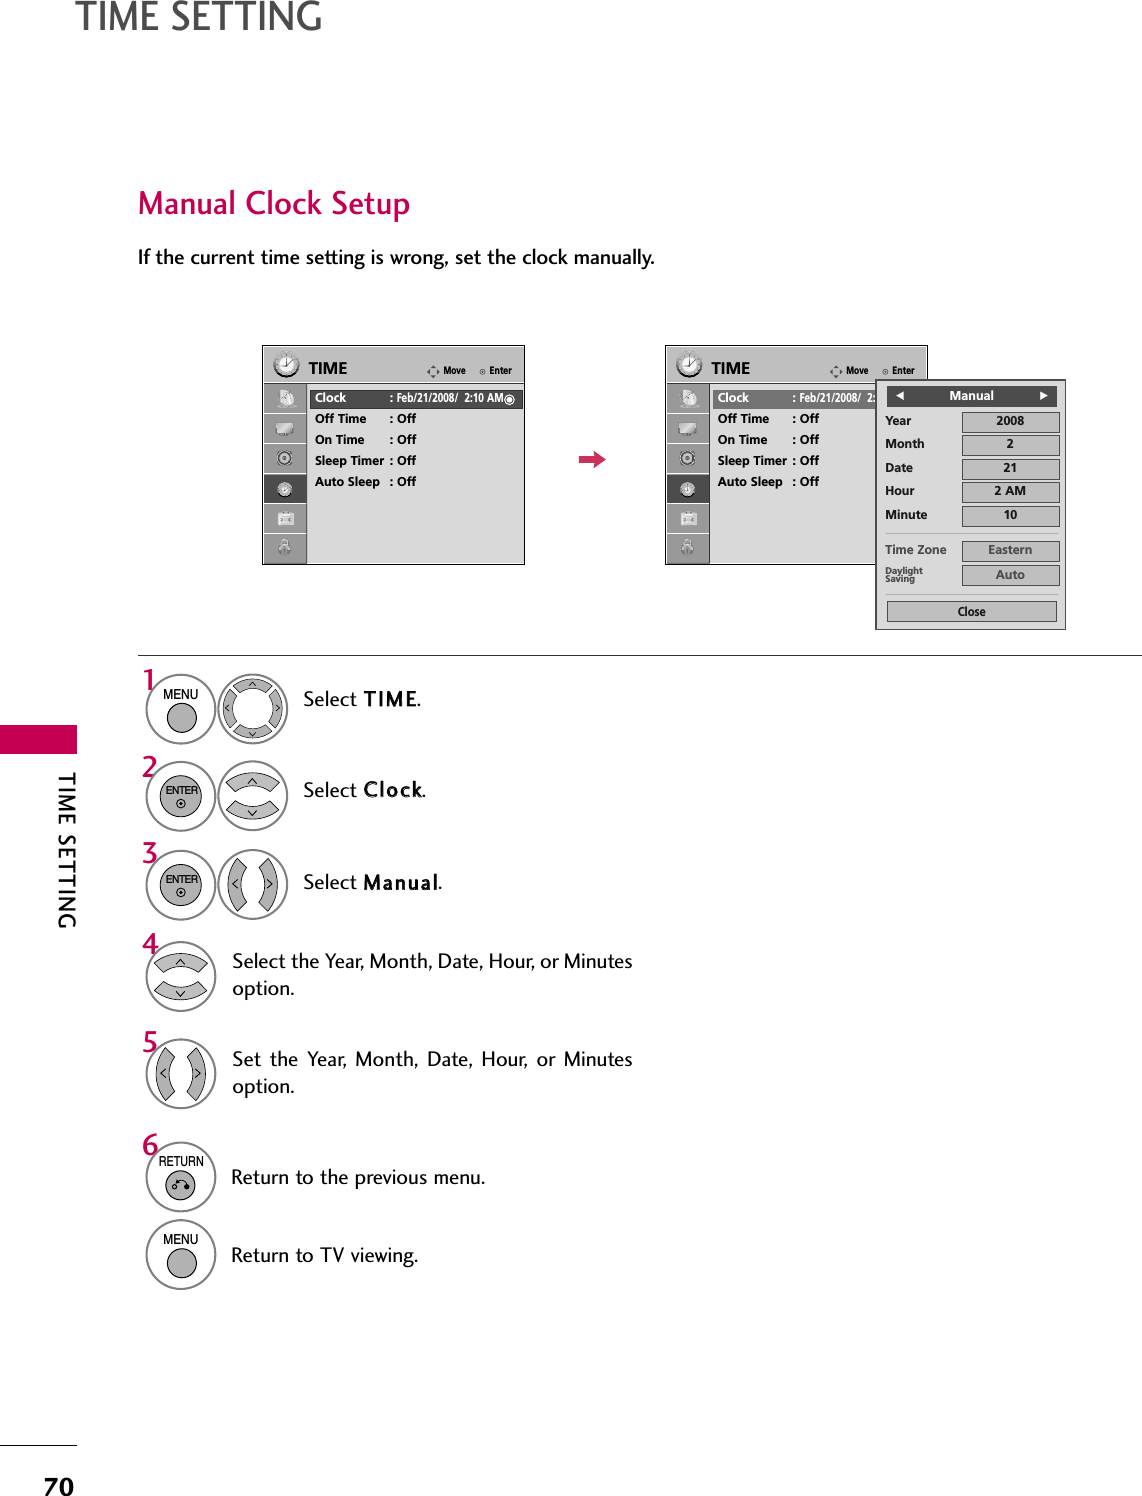 TIME SETTING70TIME SETTINGManual Clock SetupIf the current time setting is wrong, set the clock manually.Select TTIIMMEE.Select CClloocckk.Select MMaannuuaall.1MENU32ENTERENTERSelect the Year, Month, Date, Hour, or Minutesoption.4Set the  Year, Month,  Date,  Hour,  or  Minutesoption.56RETURNReturn to the previous menu.MENUReturn to TV viewing.EnterMoveTIMEClock :Feb/21/2008/  2:10 AMOff Time : OffOn Time : OffSleep Timer : OffAuto Sleep : OffEnterMoveTIMEClock :Feb/21/2008/  2:10 AMOff Time : OffOn Time : OffSleep Timer : OffAuto Sleep : OffYearMonth 2Date 21Hour 2 AM2008Minute 10Time Zone EasternDaylightSaving AutoCloseFFManualGG